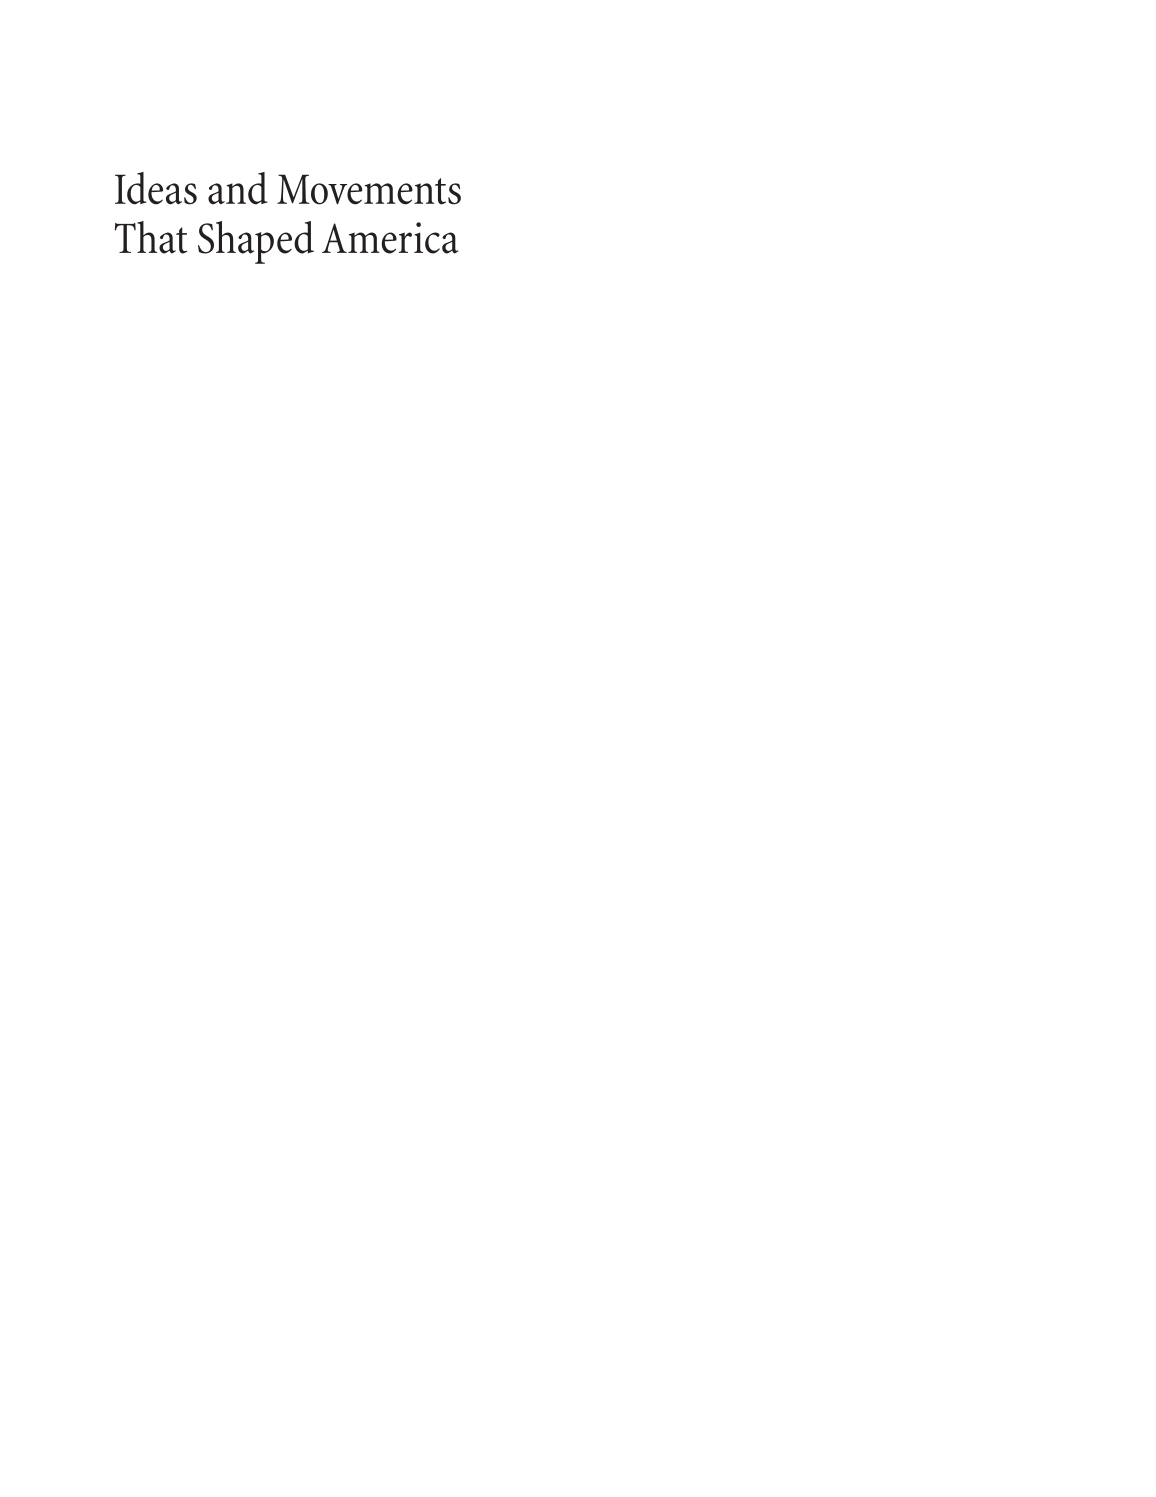 Ideas and Movements that Shaped America: From the Bill of Rights to "Occupy Wall Street" [3 volumes] page i